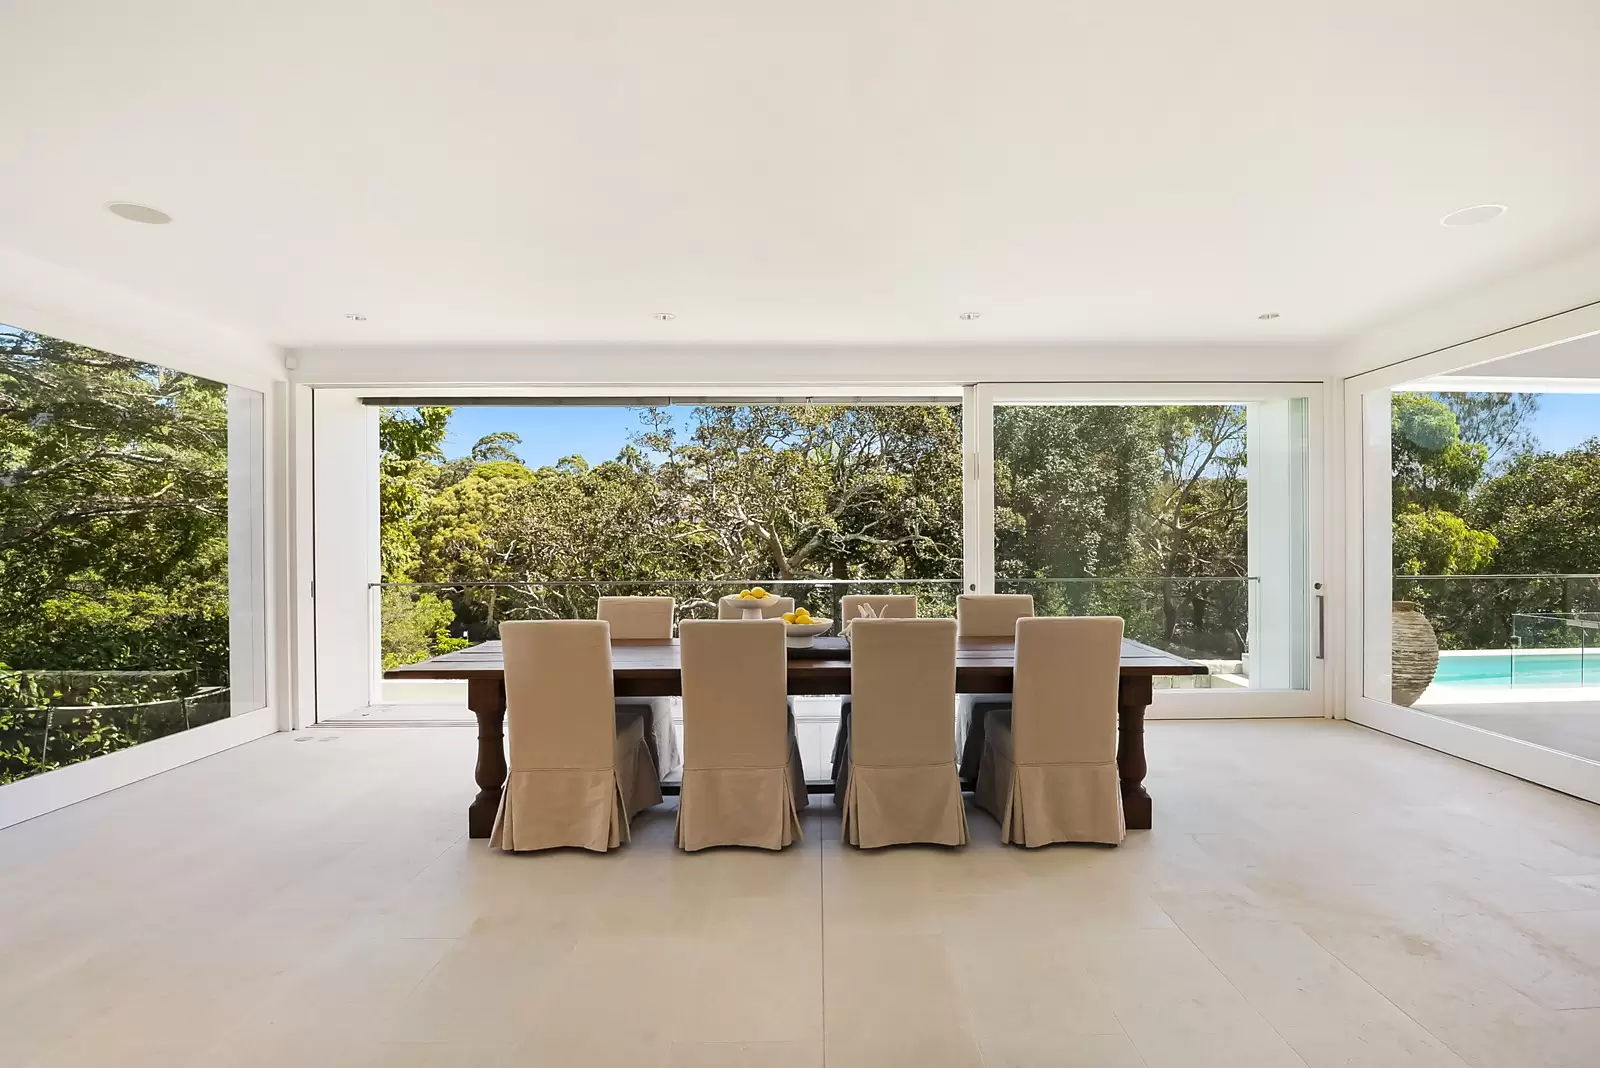 Photo #12: 10 The Crescent, Vaucluse - Sold by Sydney Sotheby's International Realty